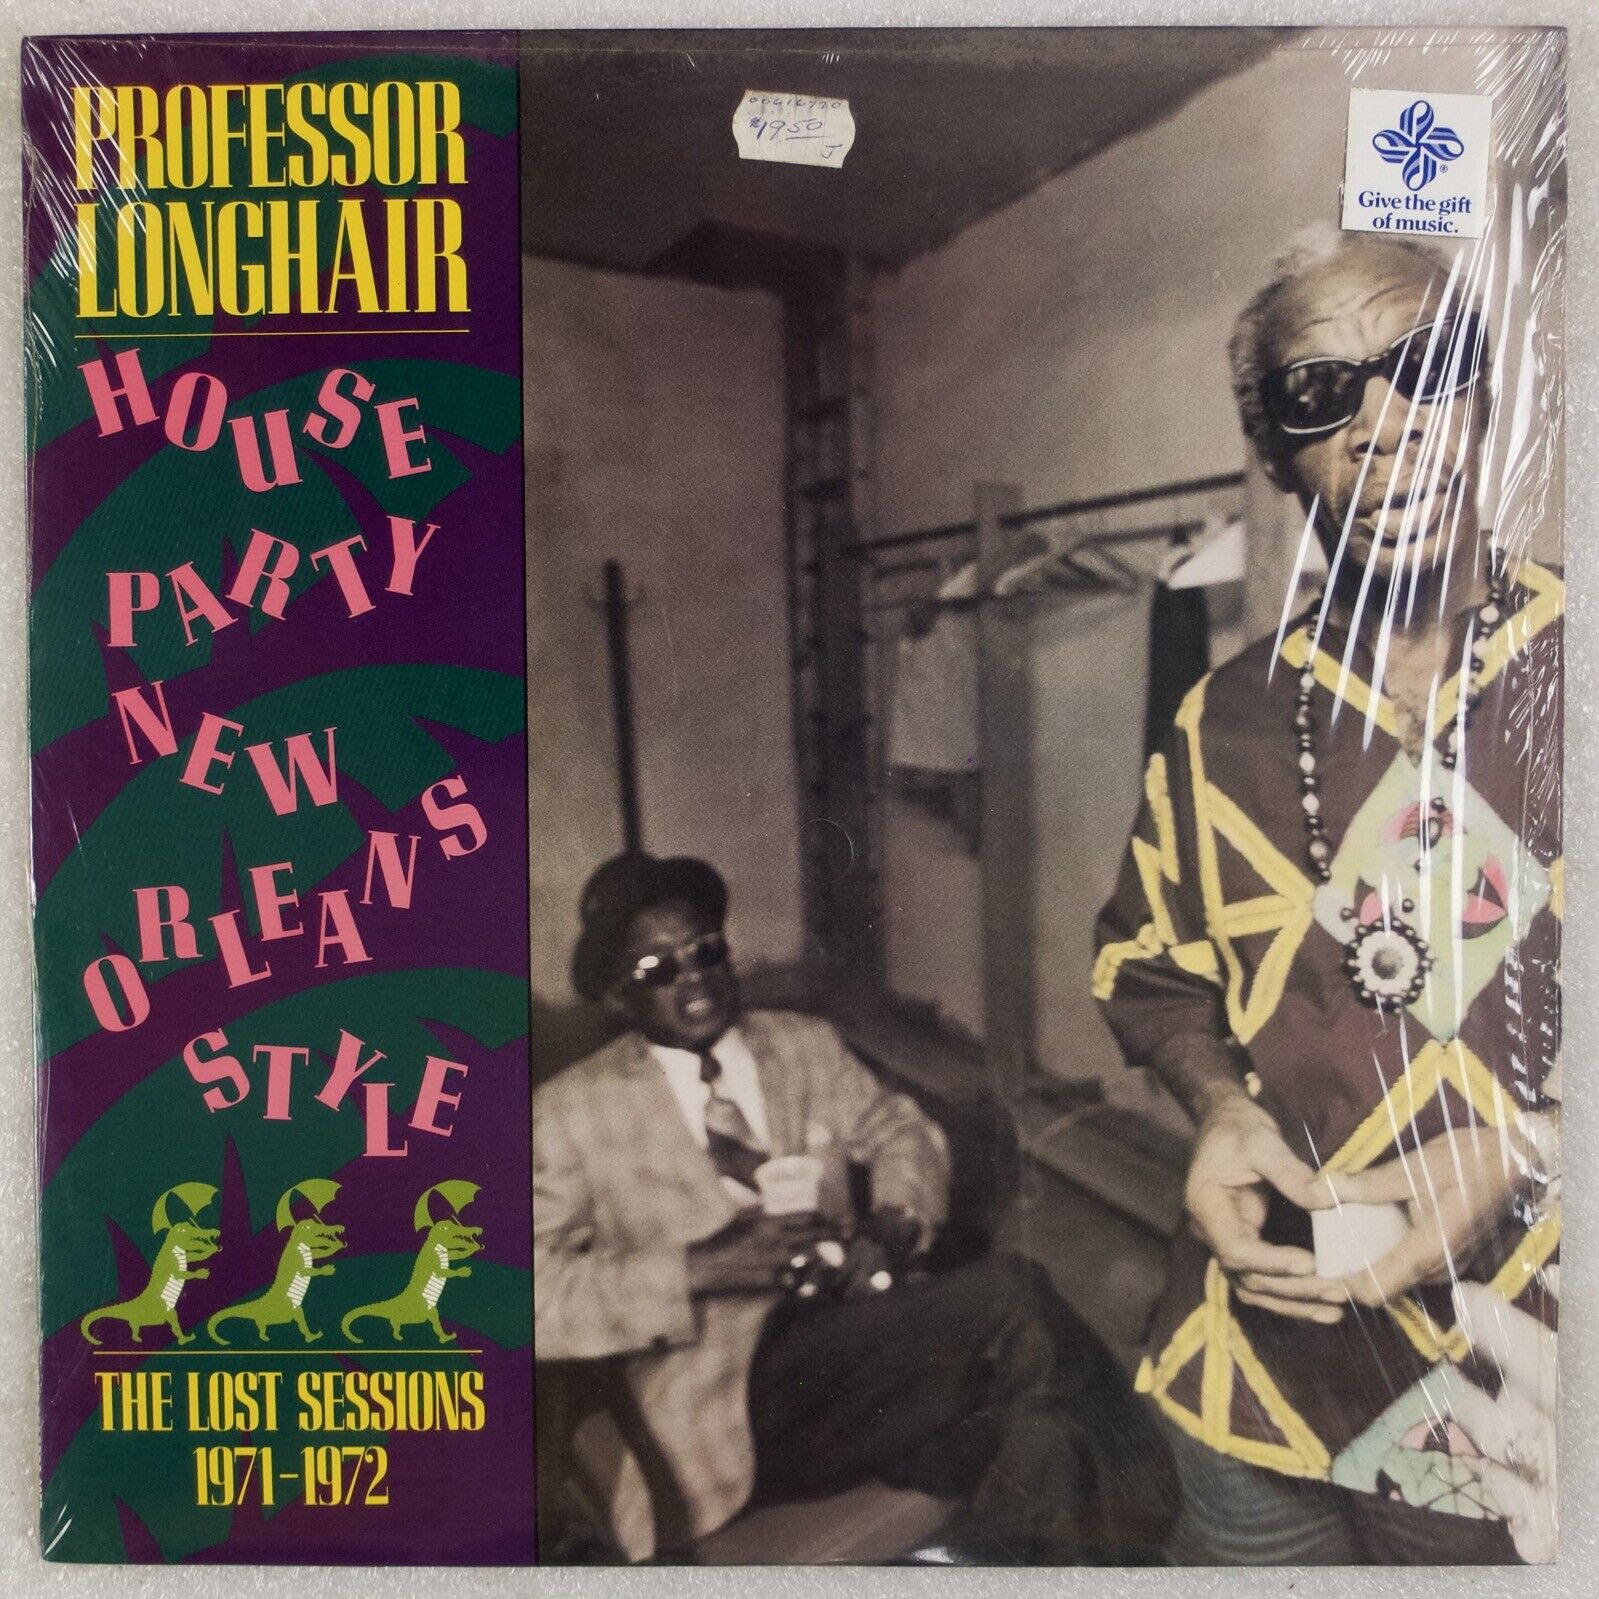 Professor Longhair House Party New Orleans Style. Wallpaper